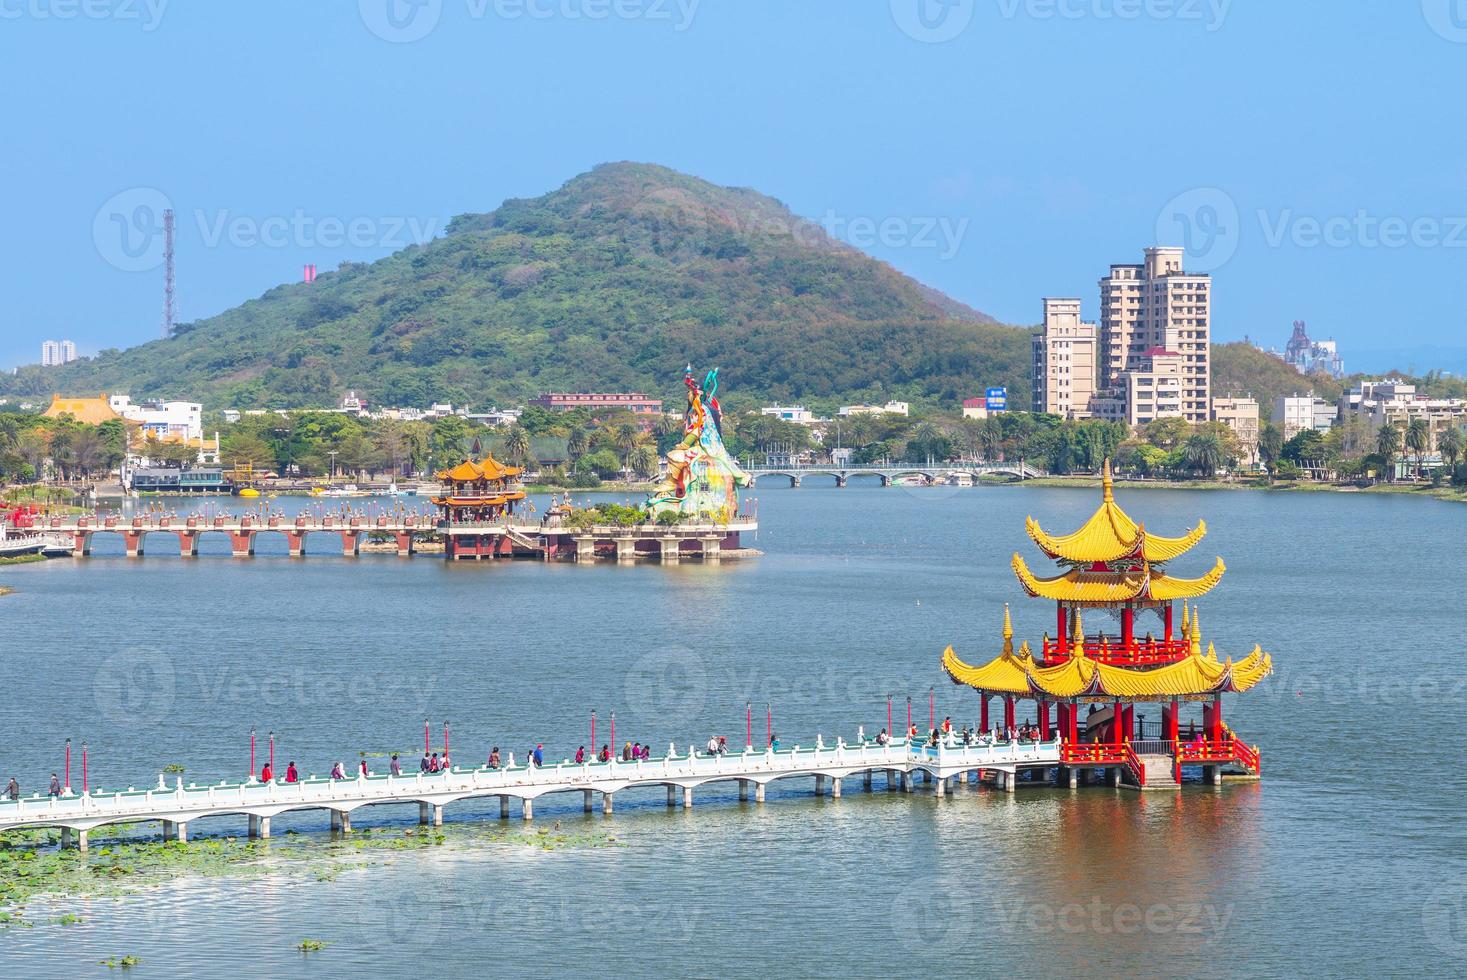 Scenery of Lotus pond in Kaohsiung, Taiwan photo